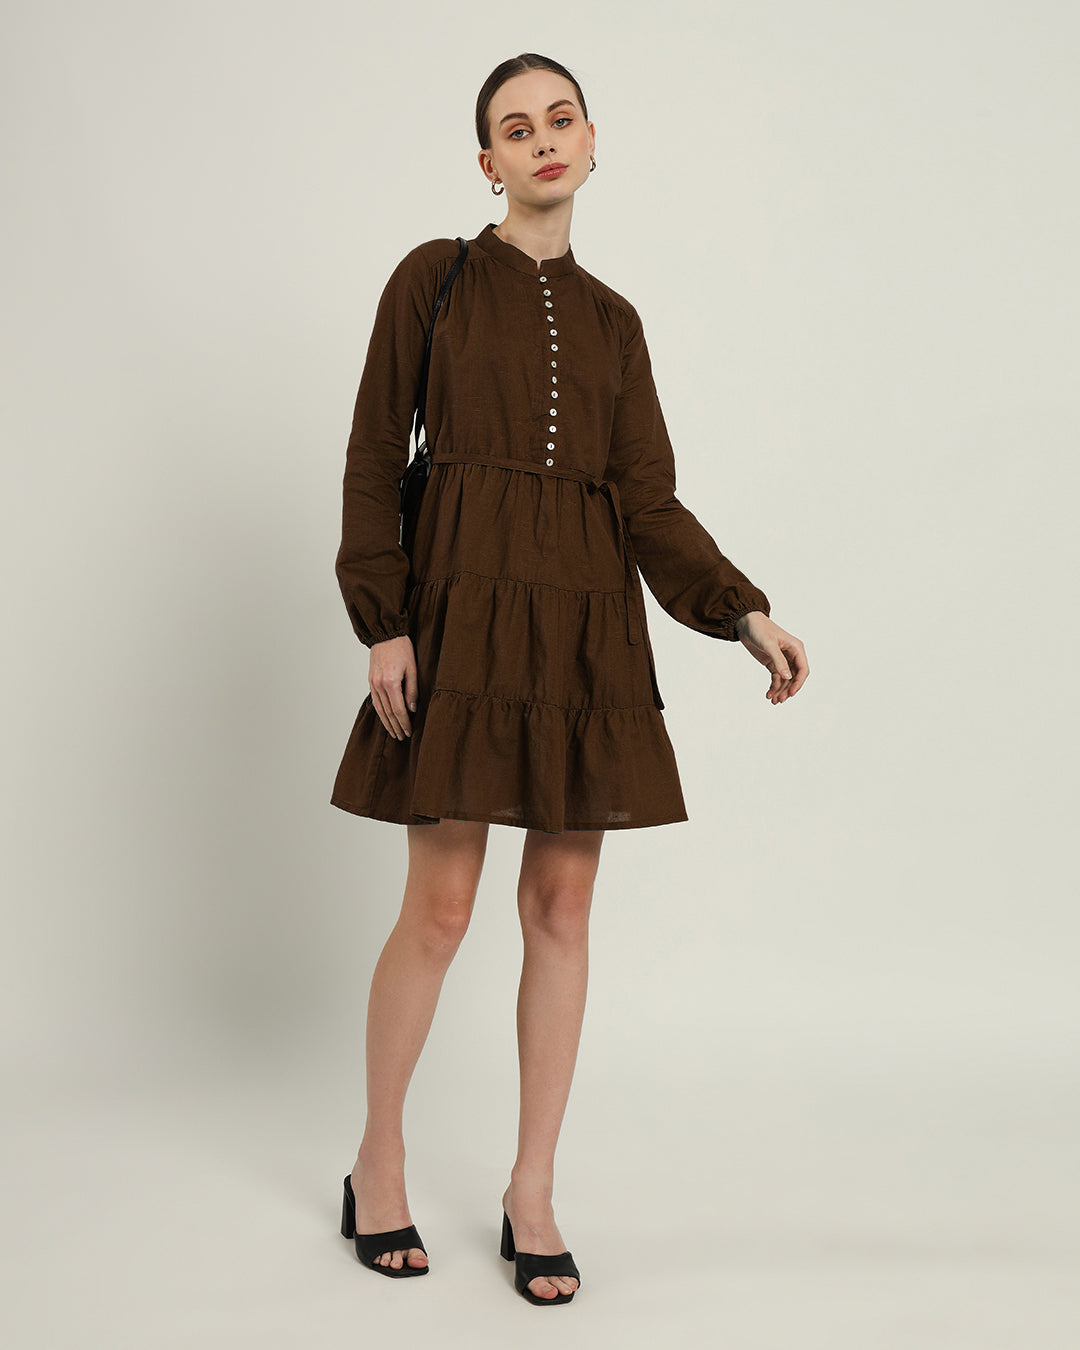 The Ely Nutshell Dress